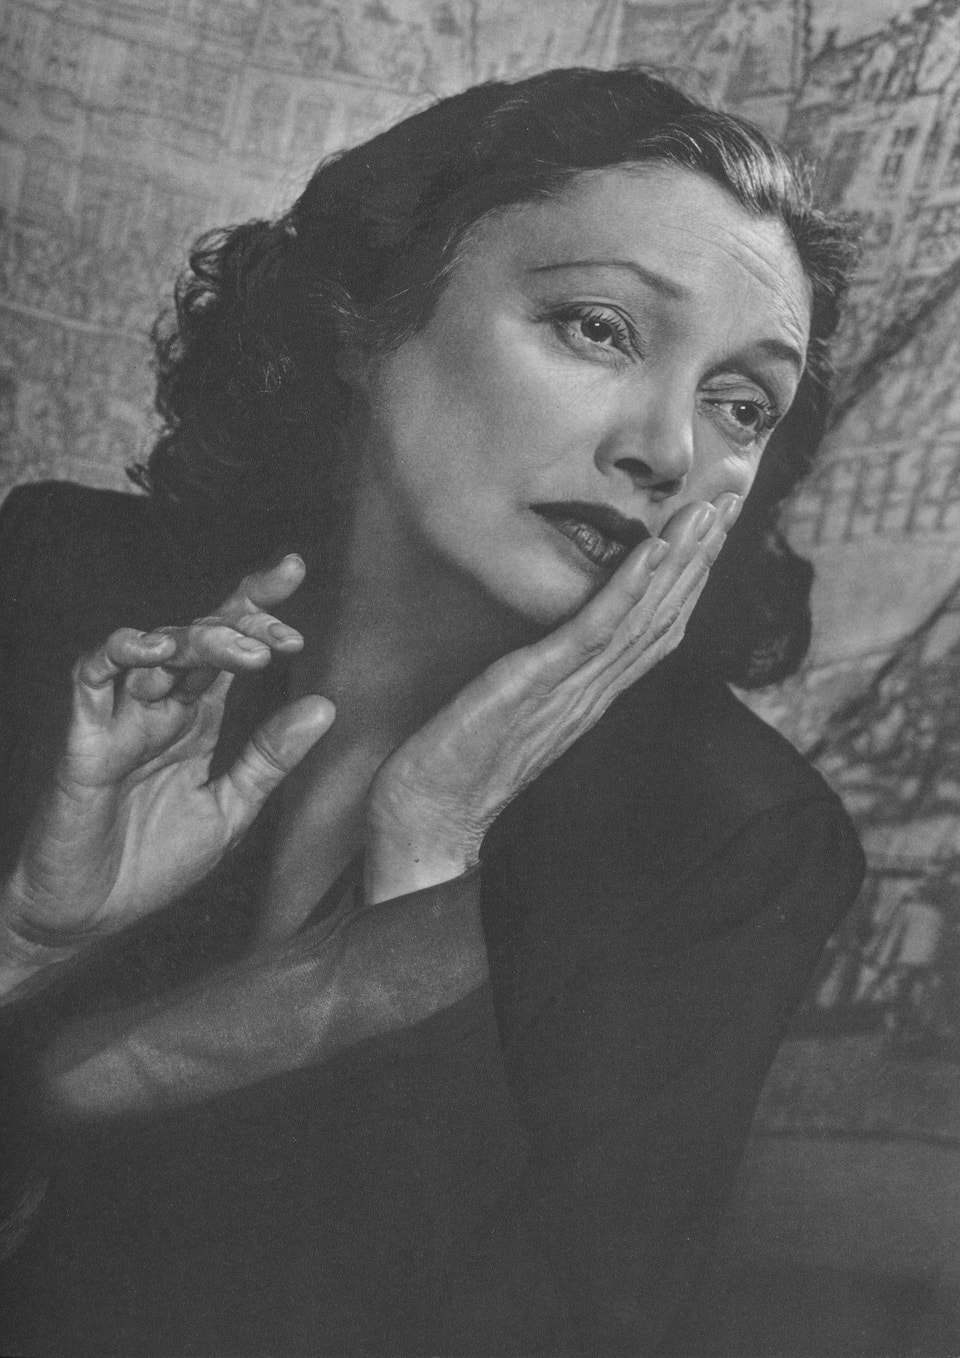 Catherine Cornell by Yousuf Karsh, 1947